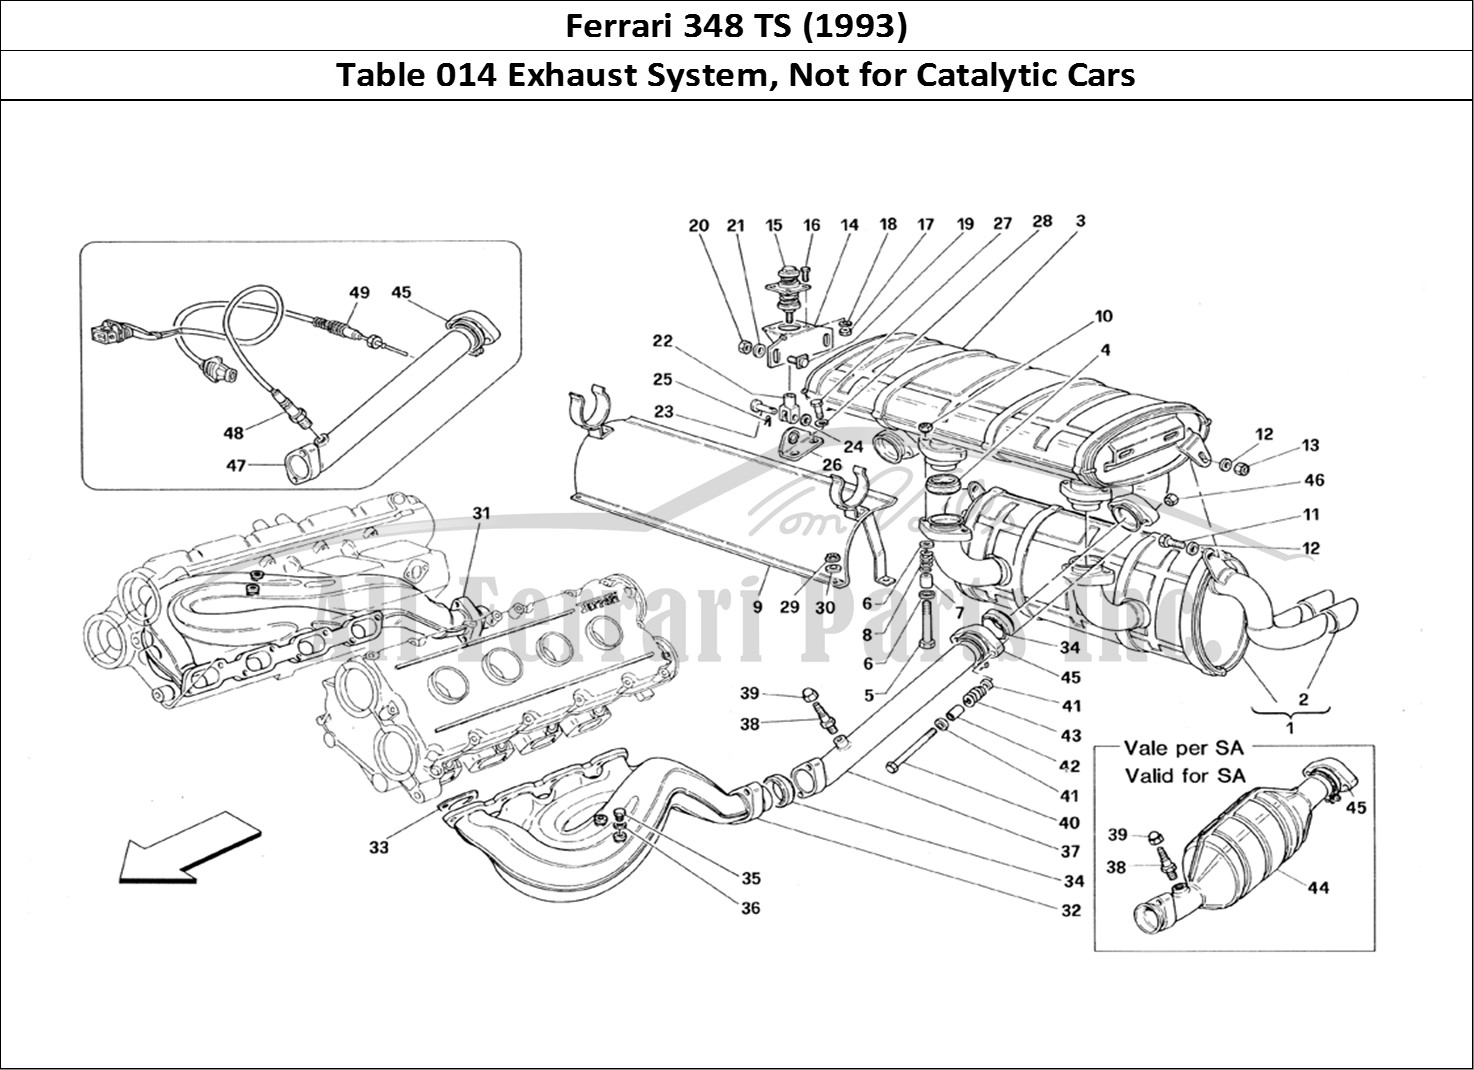 Ferrari Parts Ferrari 348 TB (1993) Page 014 Exhaust System - Not for